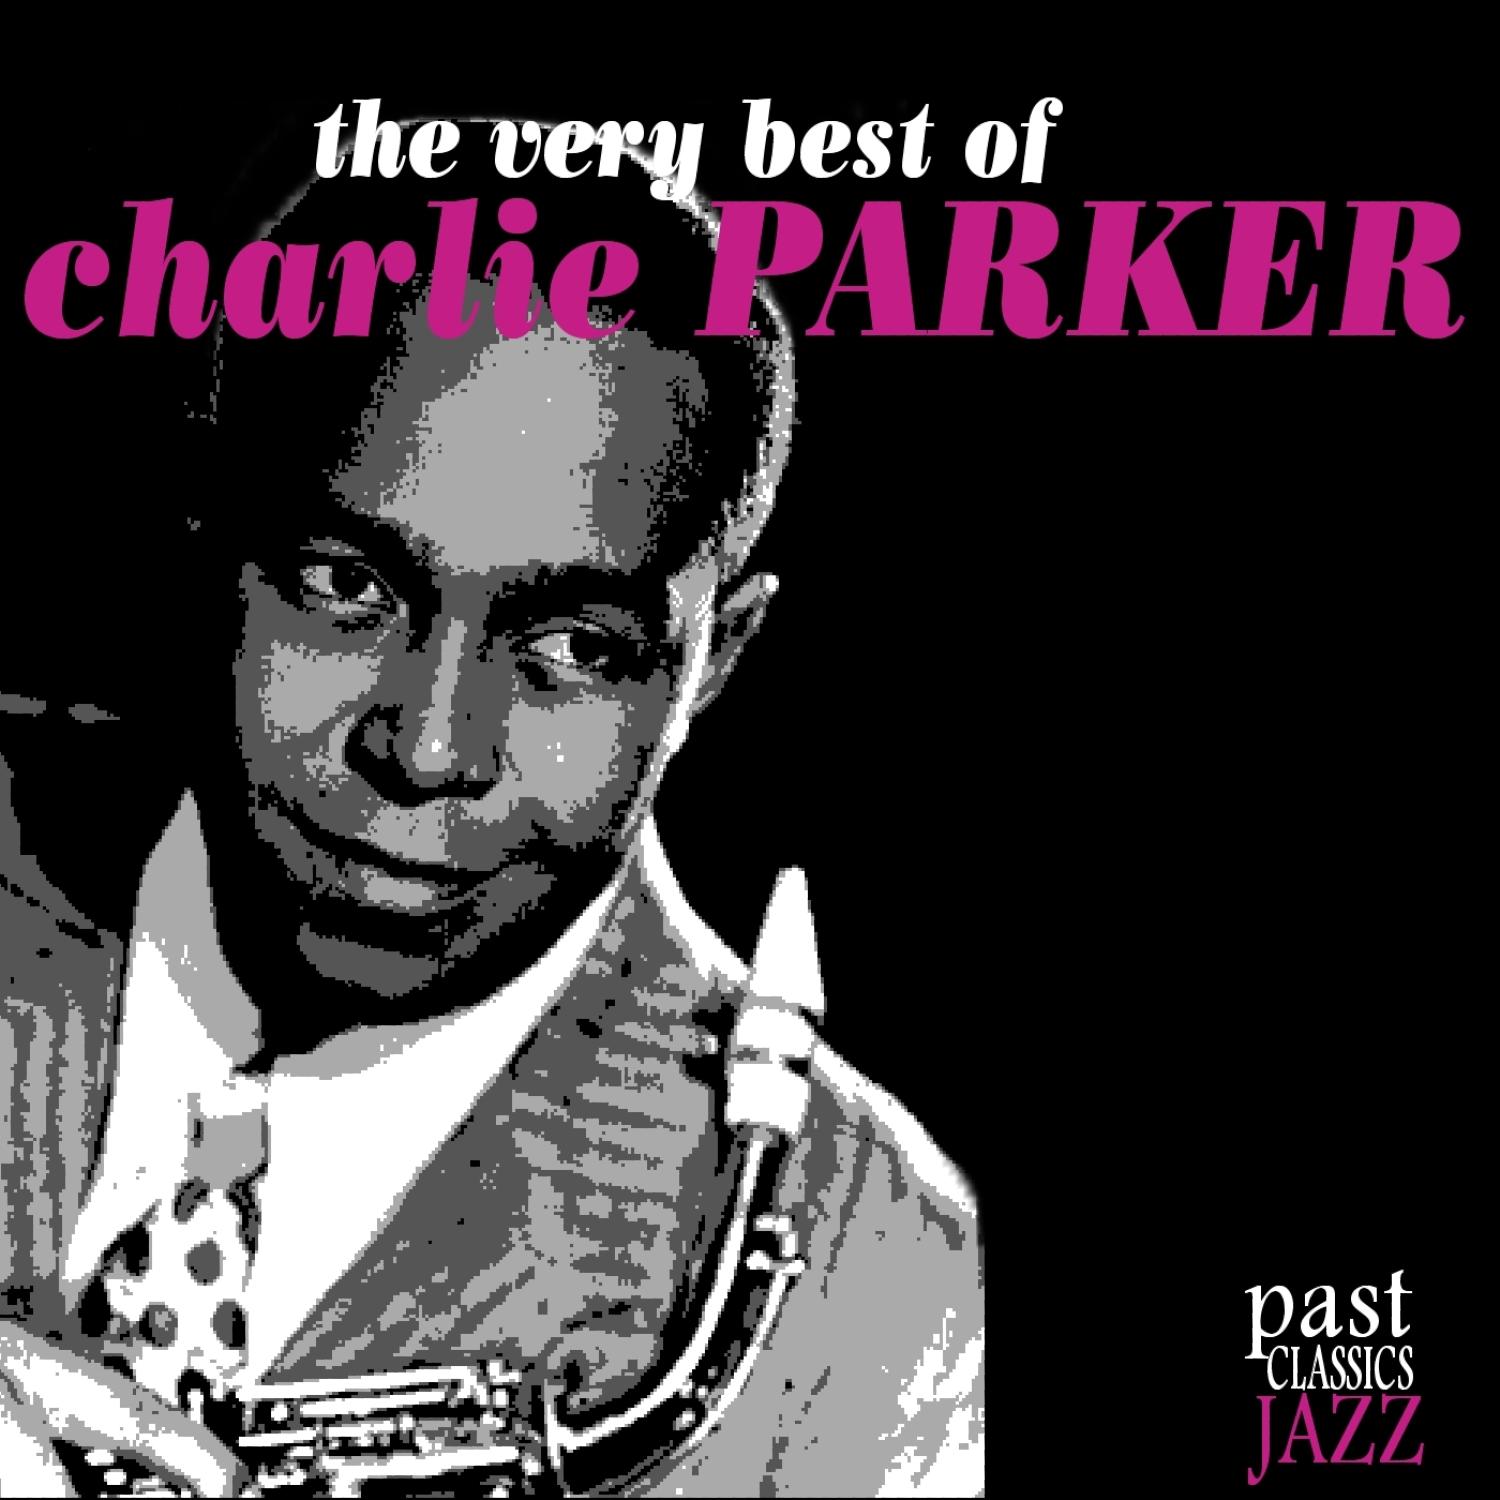 The Very Best of Charlie Parker